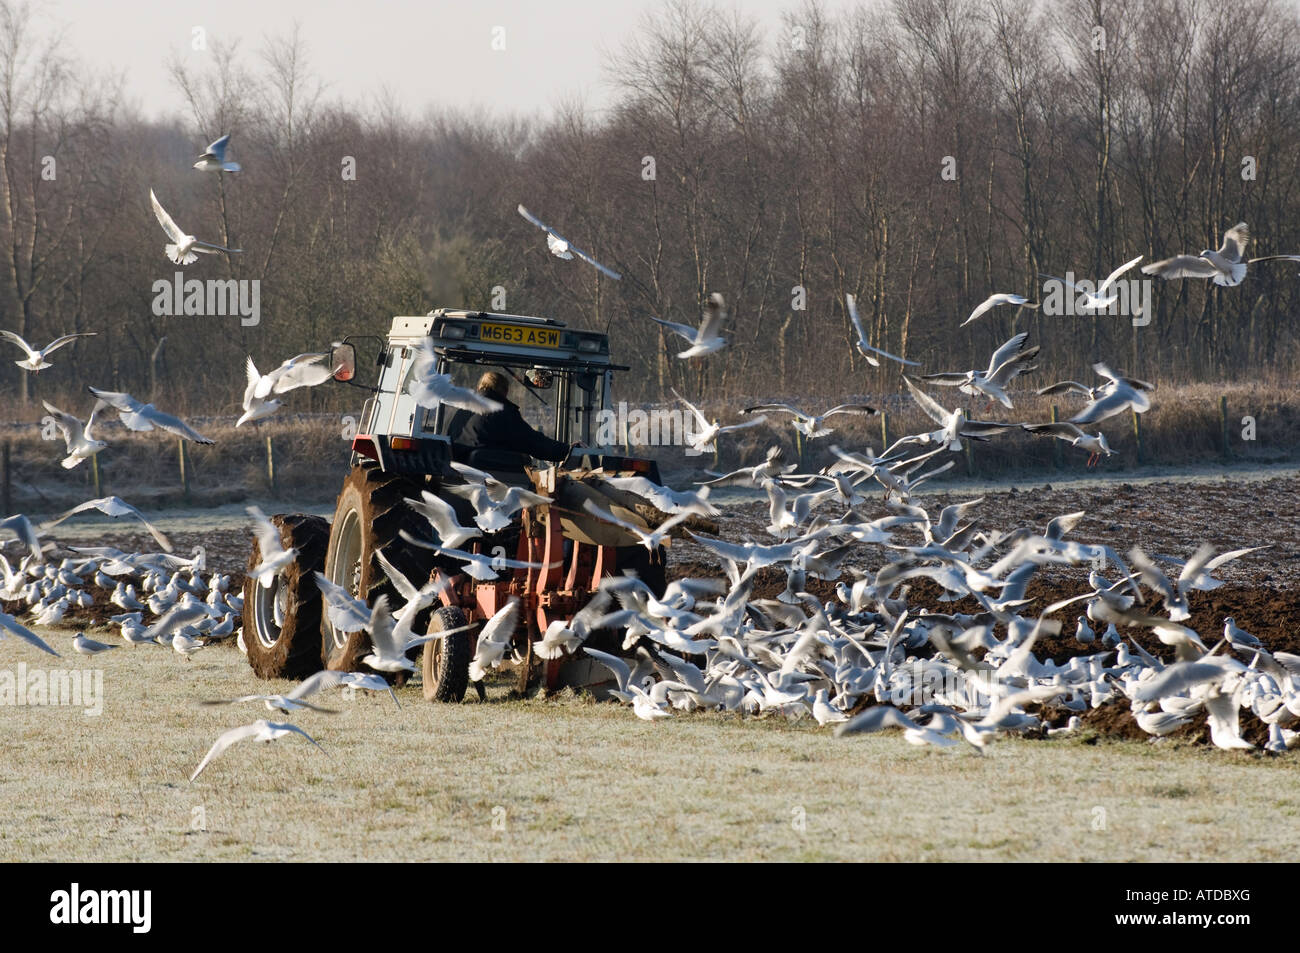 Ploughing grass in in preperation for barley planting plough being followed by flock of seagulls Dumfries Scotland Stock Photo